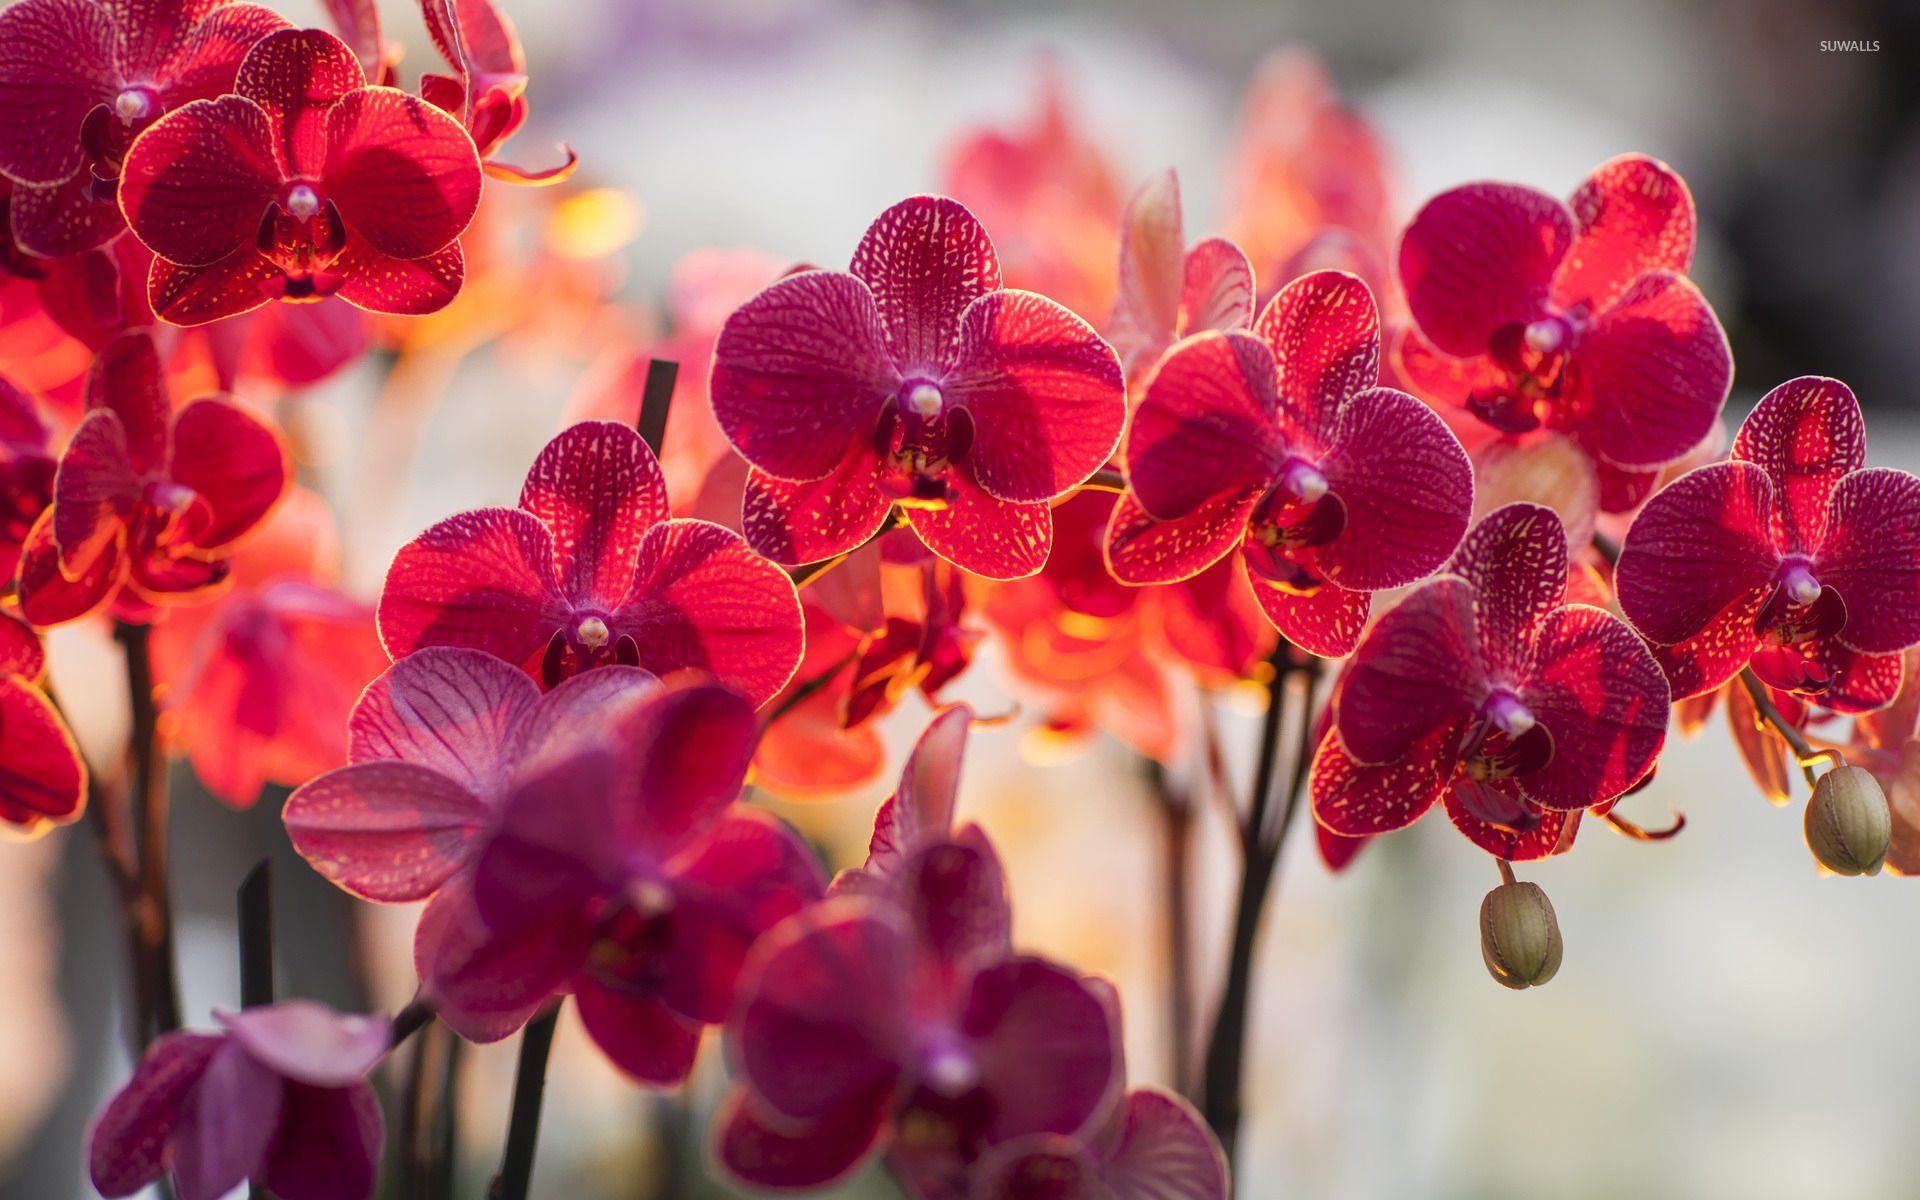 YZP2828: Orchids Background In High Quality, BsnSCB Graphics